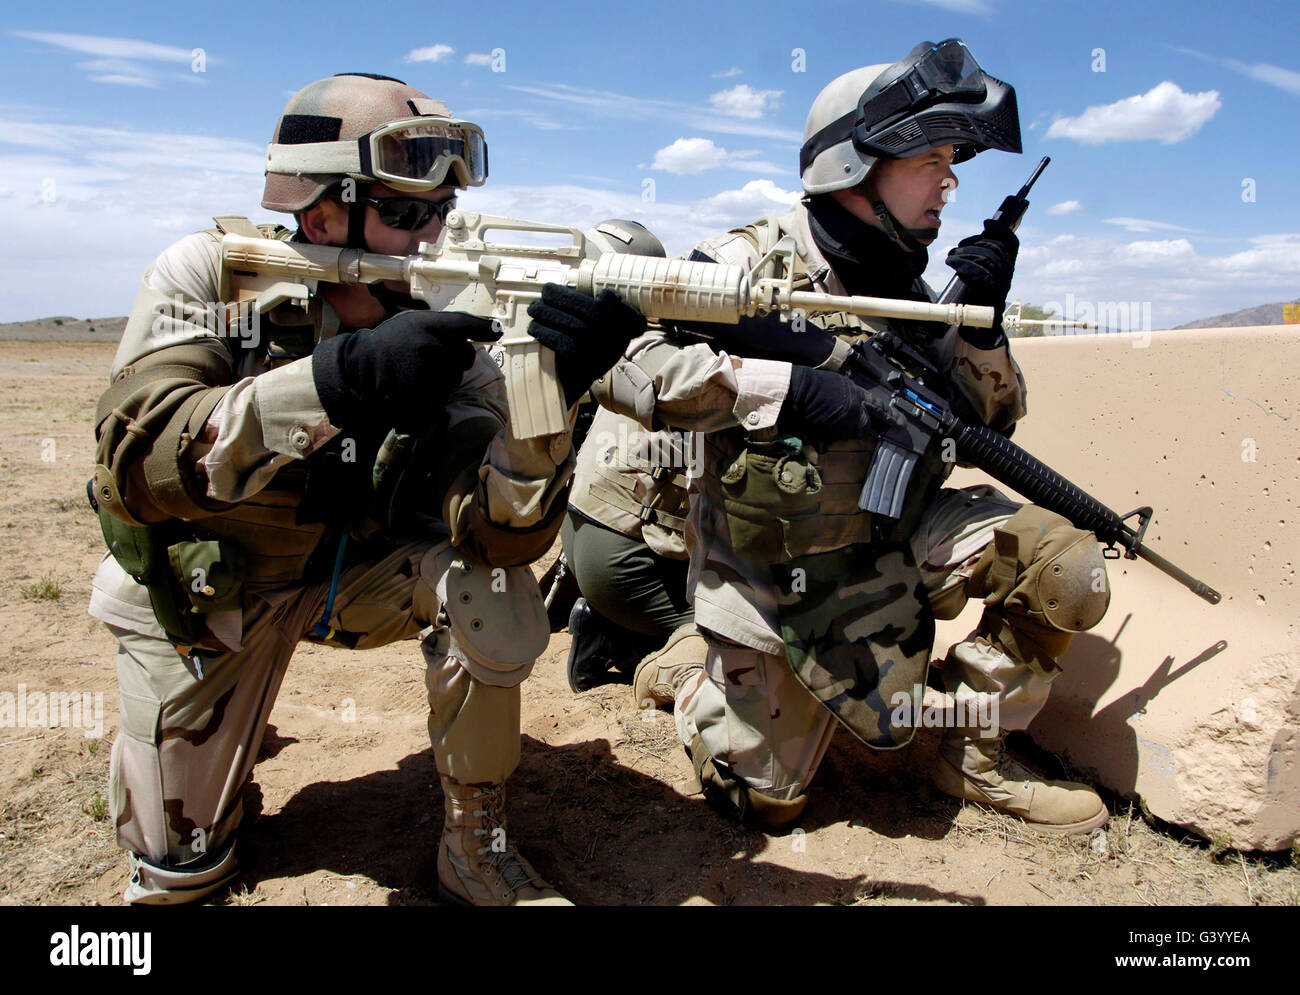 Soldiers respond to a threat in a combat skills training course Stock Photo